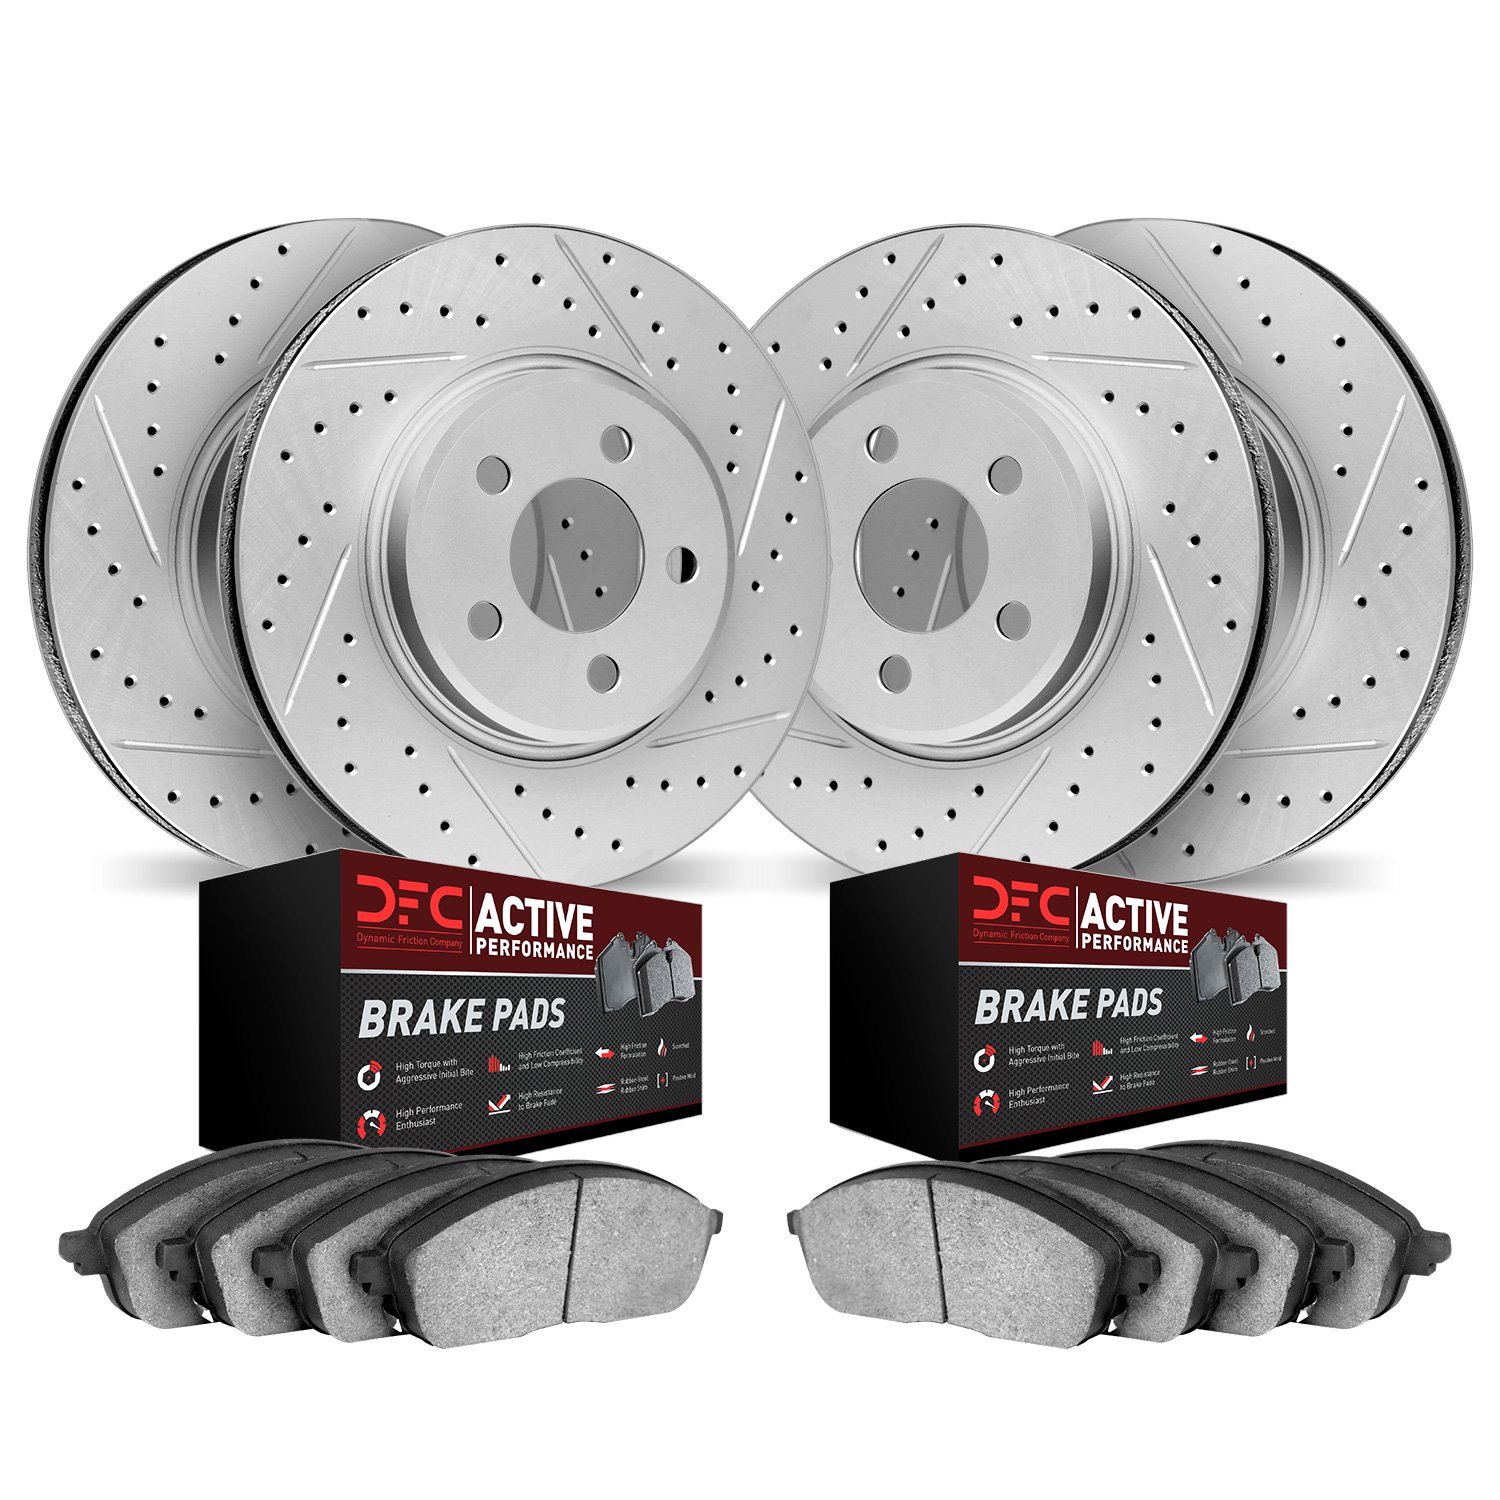 2704-75012 Geoperformance Drilled/Slotted Brake Rotors with Active Performance Pads Kit, 2010-2013 Lexus/Toyota/Scion, Position: